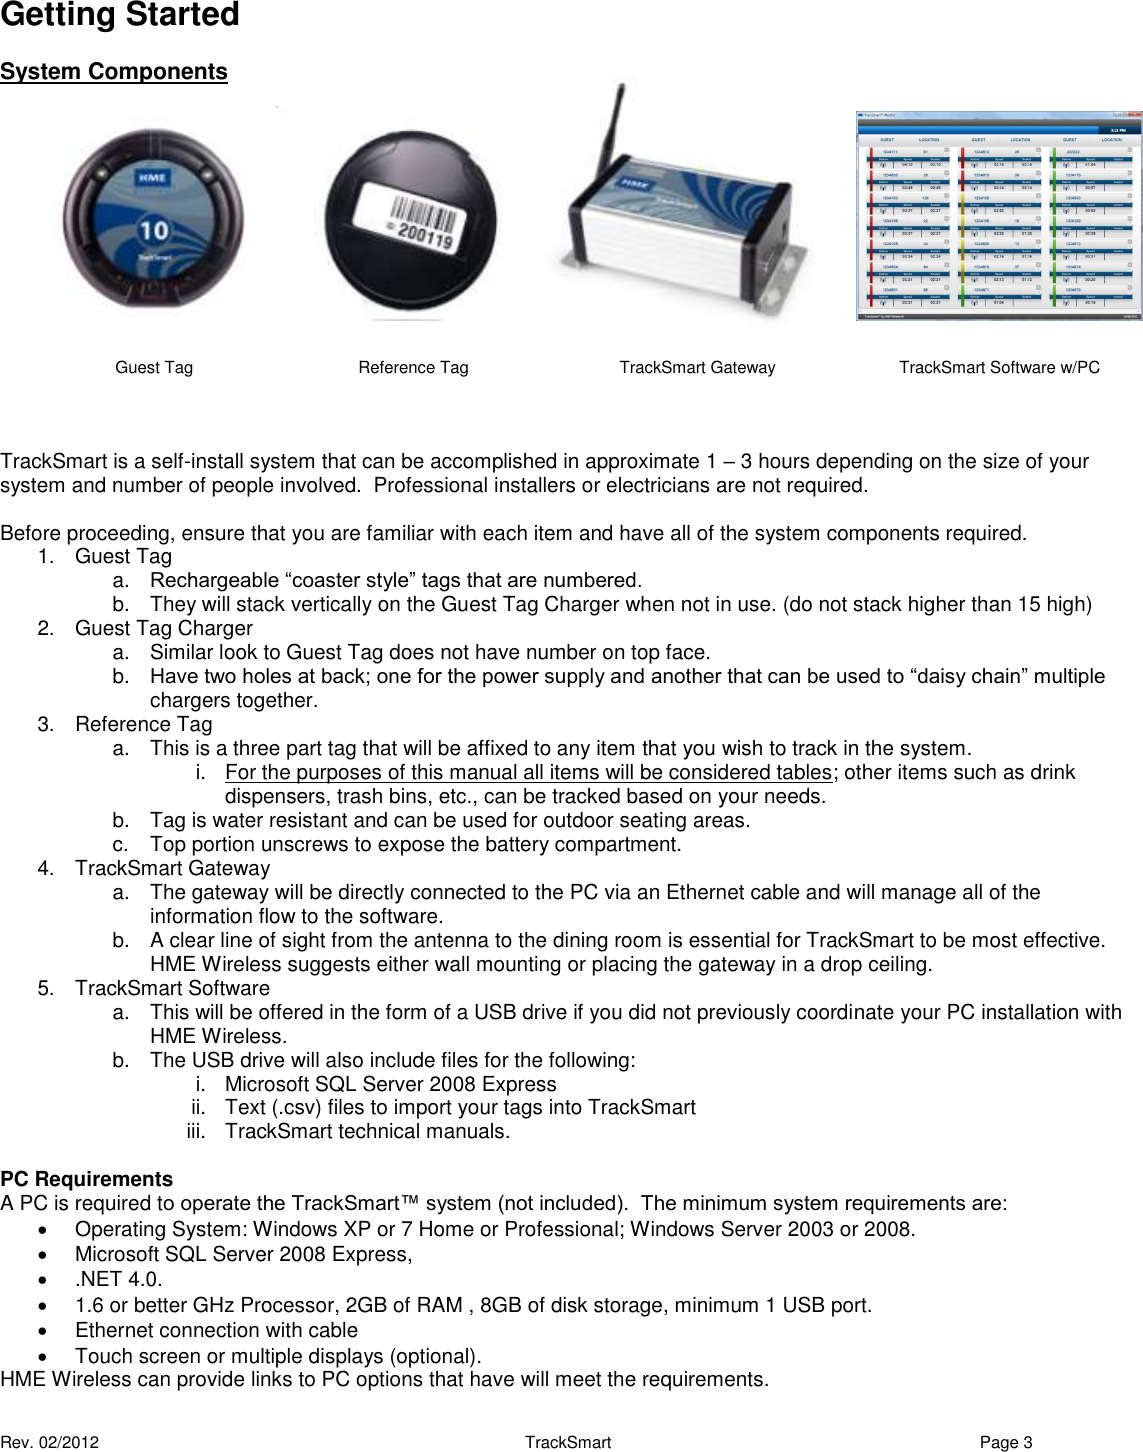  Rev. 02/2012                                                     TrackSmart     Page 3  Getting Started System Components                TrackSmart is a self-install system that can be accomplished in approximate 1 – 3 hours depending on the size of your system and number of people involved.  Professional installers or electricians are not required.  Before proceeding, ensure that you are familiar with each item and have all of the system components required. 1.  Guest Tag  a. Rechargeable “coaster style” tags that are numbered. b.  They will stack vertically on the Guest Tag Charger when not in use. (do not stack higher than 15 high) 2.  Guest Tag Charger a.  Similar look to Guest Tag does not have number on top face. b. Have two holes at back; one for the power supply and another that can be used to “daisy chain” multiple chargers together.  3.  Reference Tag a.  This is a three part tag that will be affixed to any item that you wish to track in the system. i.  For the purposes of this manual all items will be considered tables; other items such as drink dispensers, trash bins, etc., can be tracked based on your needs. b.  Tag is water resistant and can be used for outdoor seating areas. c.  Top portion unscrews to expose the battery compartment. 4.  TrackSmart Gateway a.  The gateway will be directly connected to the PC via an Ethernet cable and will manage all of the information flow to the software. b.  A clear line of sight from the antenna to the dining room is essential for TrackSmart to be most effective.  HME Wireless suggests either wall mounting or placing the gateway in a drop ceiling. 5.  TrackSmart Software  a.  This will be offered in the form of a USB drive if you did not previously coordinate your PC installation with HME Wireless. b.  The USB drive will also include files for the following: i.  Microsoft SQL Server 2008 Express ii.  Text (.csv) files to import your tags into TrackSmart iii.  TrackSmart technical manuals.  PC Requirements  A PC is required to operate the TrackSmart™ system (not included).  The minimum system requirements are:   Operating System: Windows XP or 7 Home or Professional; Windows Server 2003 or 2008.   Microsoft SQL Server 2008 Express,    .NET 4.0.   1.6 or better GHz Processor, 2GB of RAM , 8GB of disk storage, minimum 1 USB port.   Ethernet connection with cable   Touch screen or multiple displays (optional). HME Wireless can provide links to PC options that have will meet the requirements. Reference Tag Guest Tag TrackSmart Gateway TrackSmart Software w/PC 